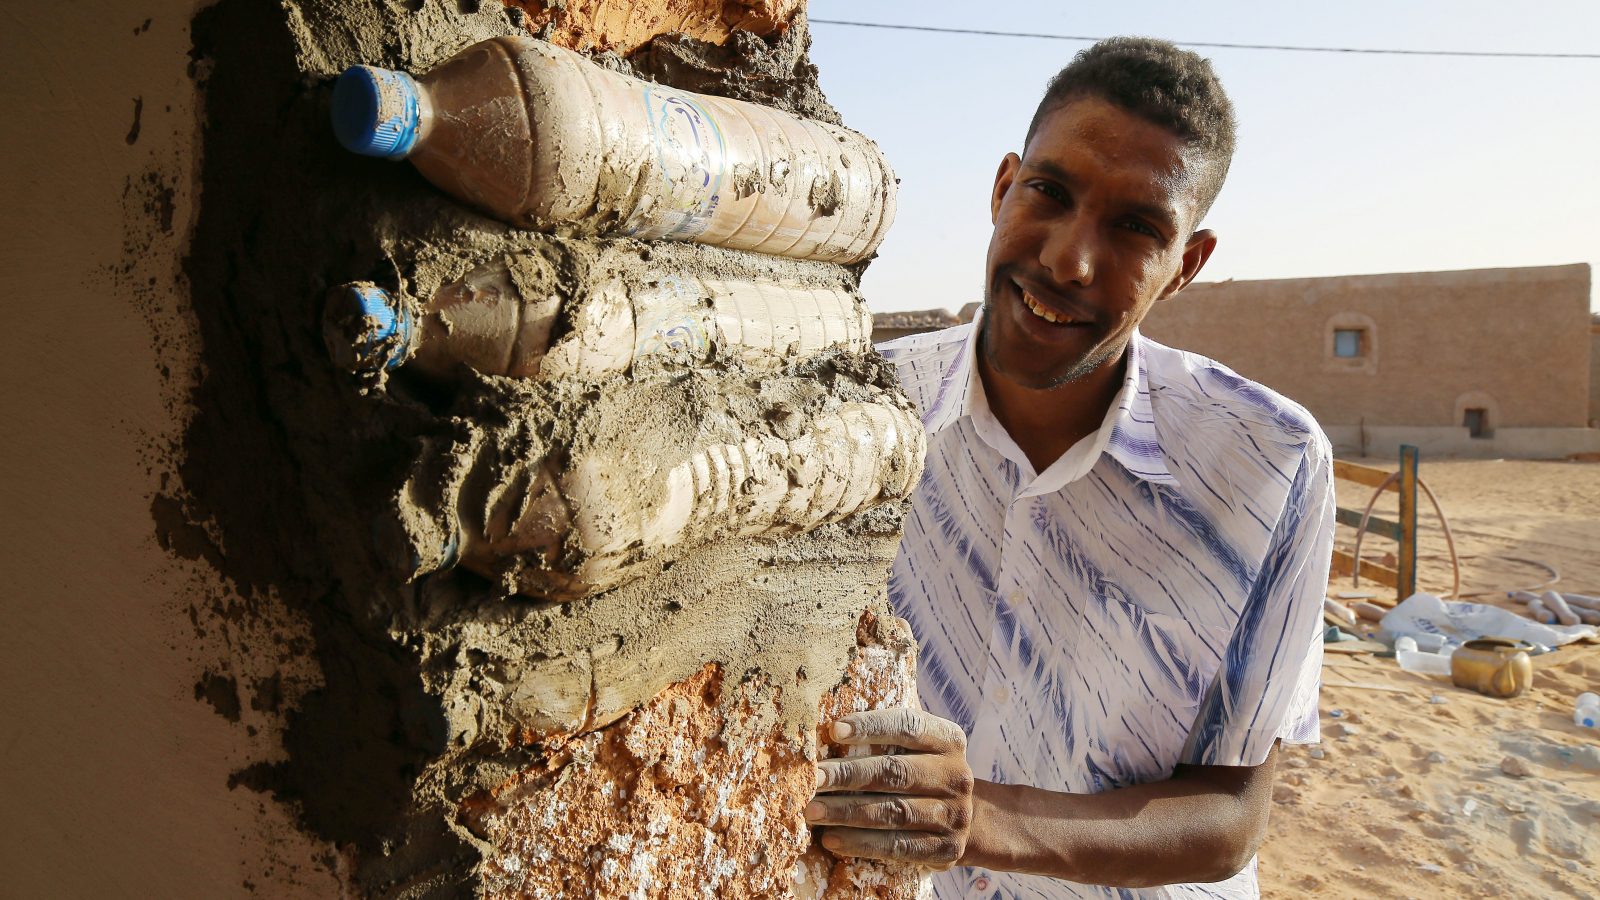 Tateh Lehbib shows how to build an ecological house from waste plastic bottles filled with sand. The circular houses, built in the Tindouf refugee camp, are resistant to wind and heavy rains and offer good protection against the harshness of the Algerian desert.